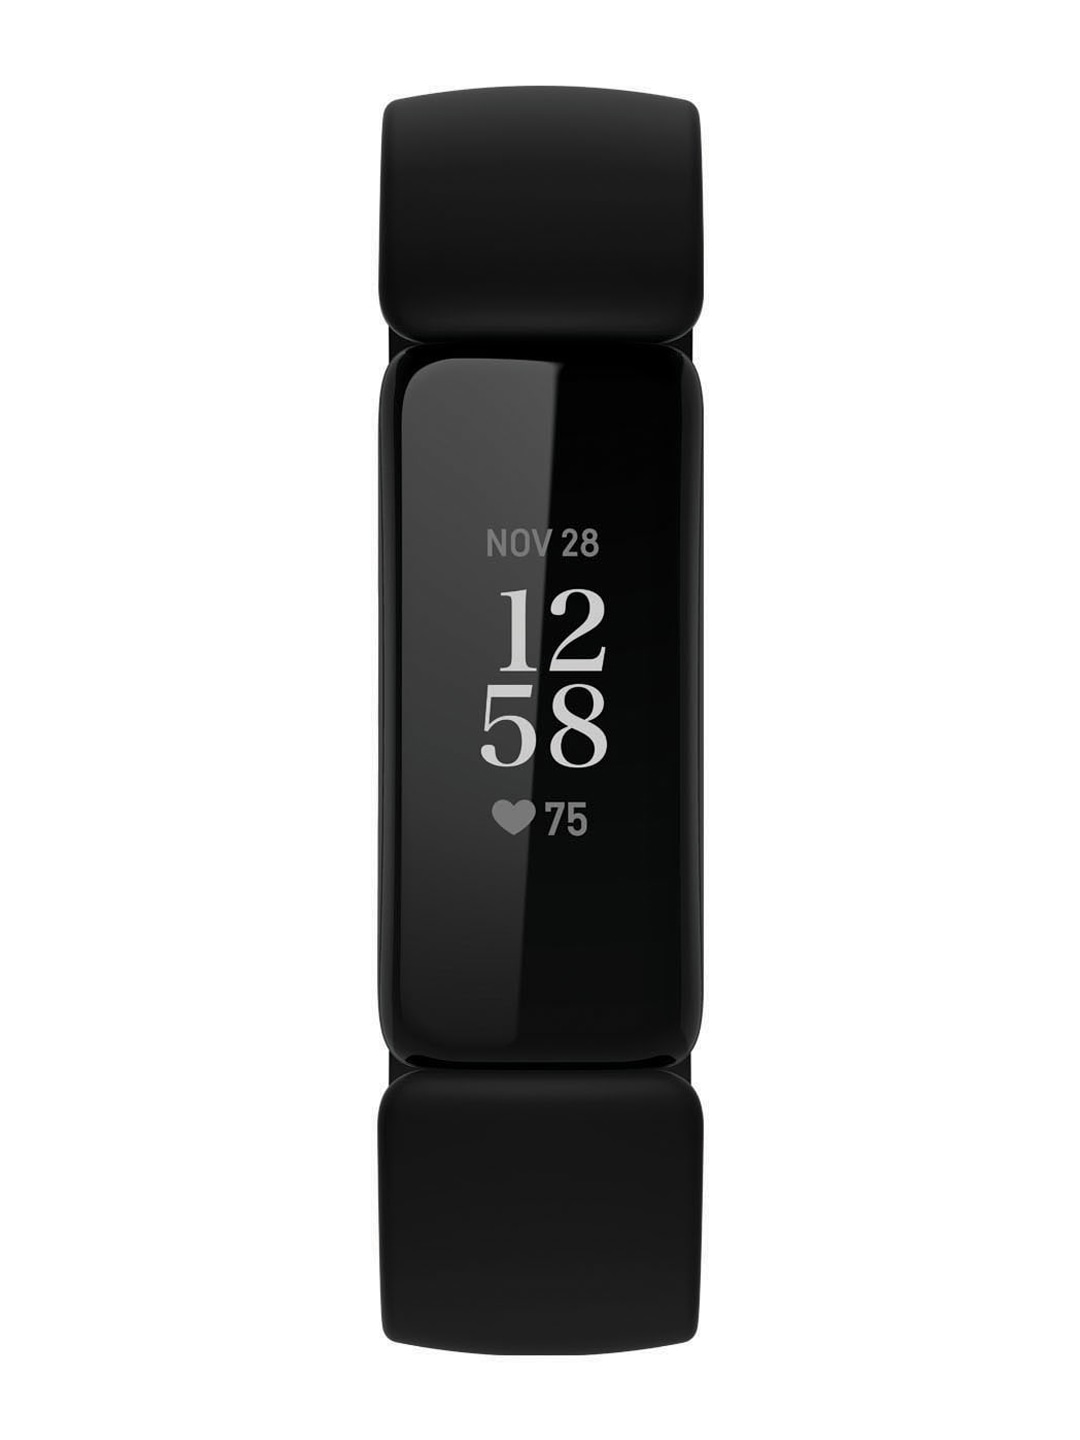 Accessories Fitness Bands | Fitbit Unisex Black Inspire 2 Fitness Band - UH75625